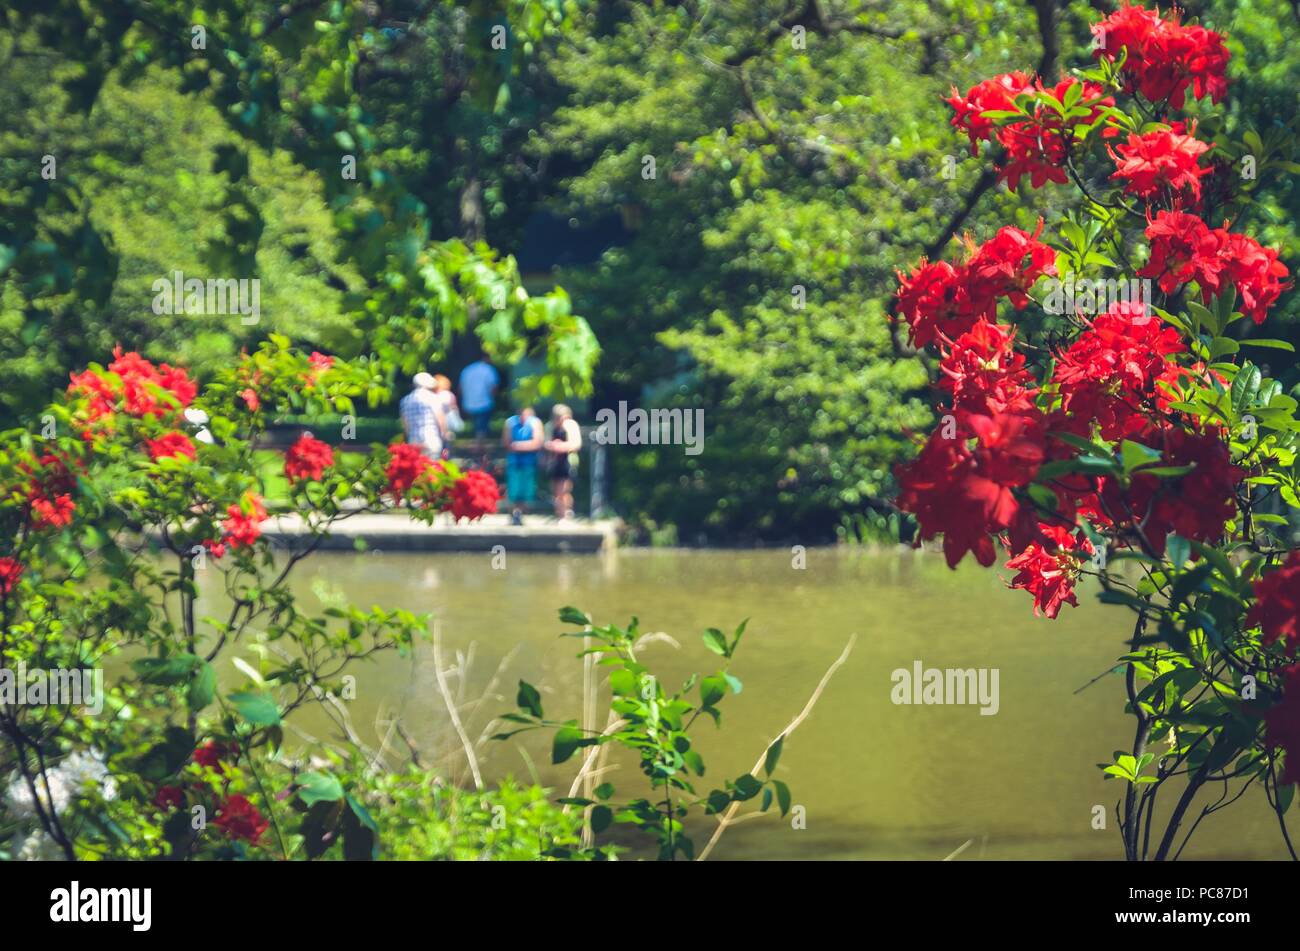 Beautiful spring landscape. Colorful flowers and greenery at the pond in the park. Stock Photo